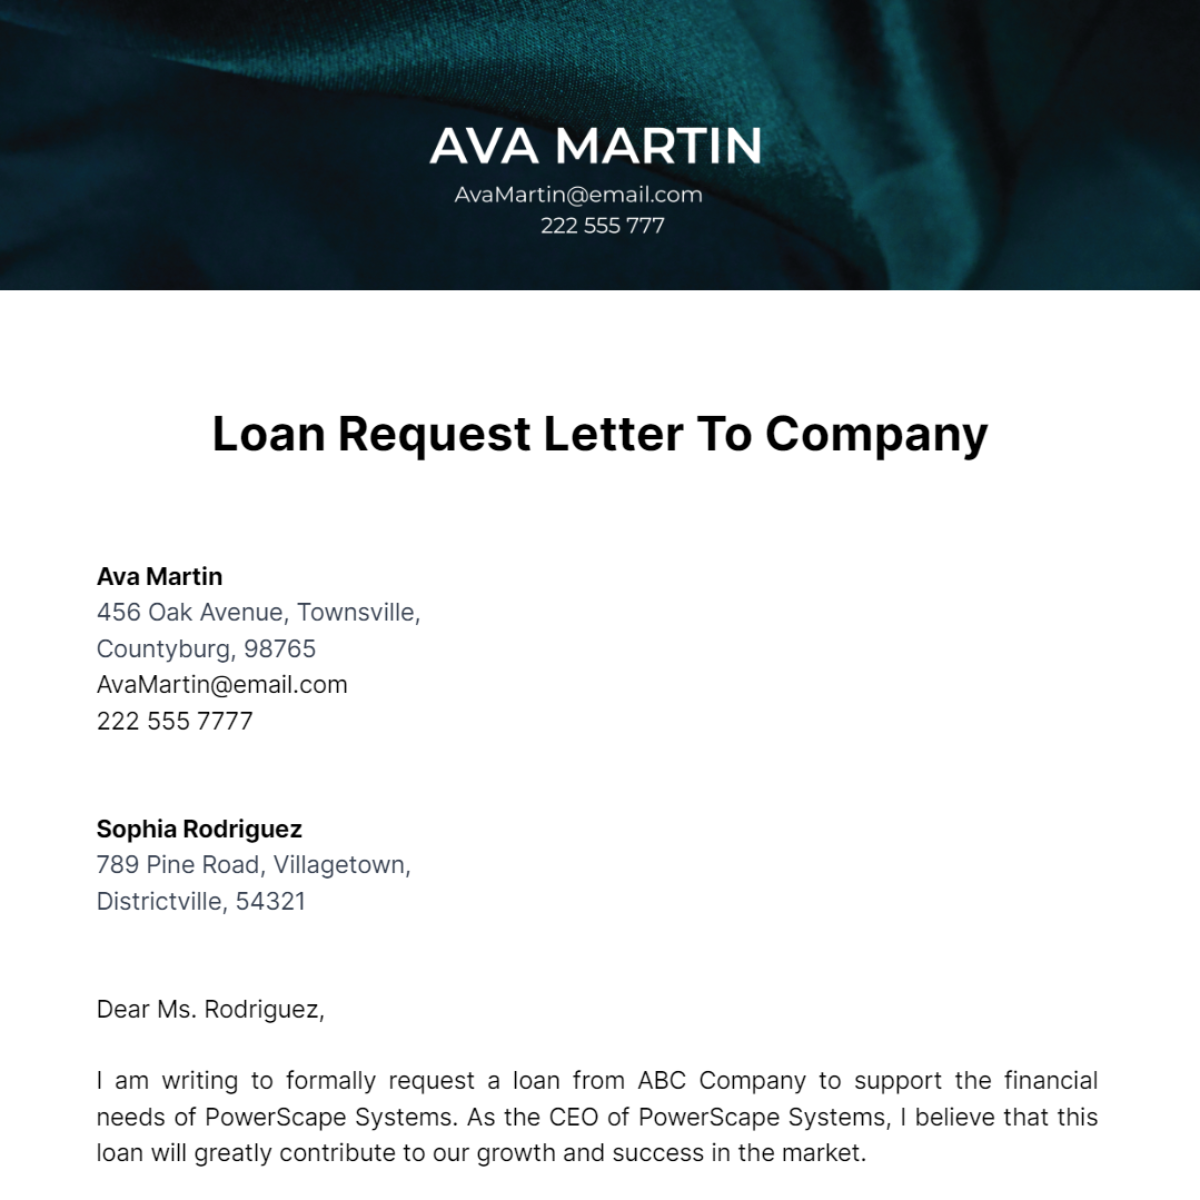 Loan Request Letter To Company Template